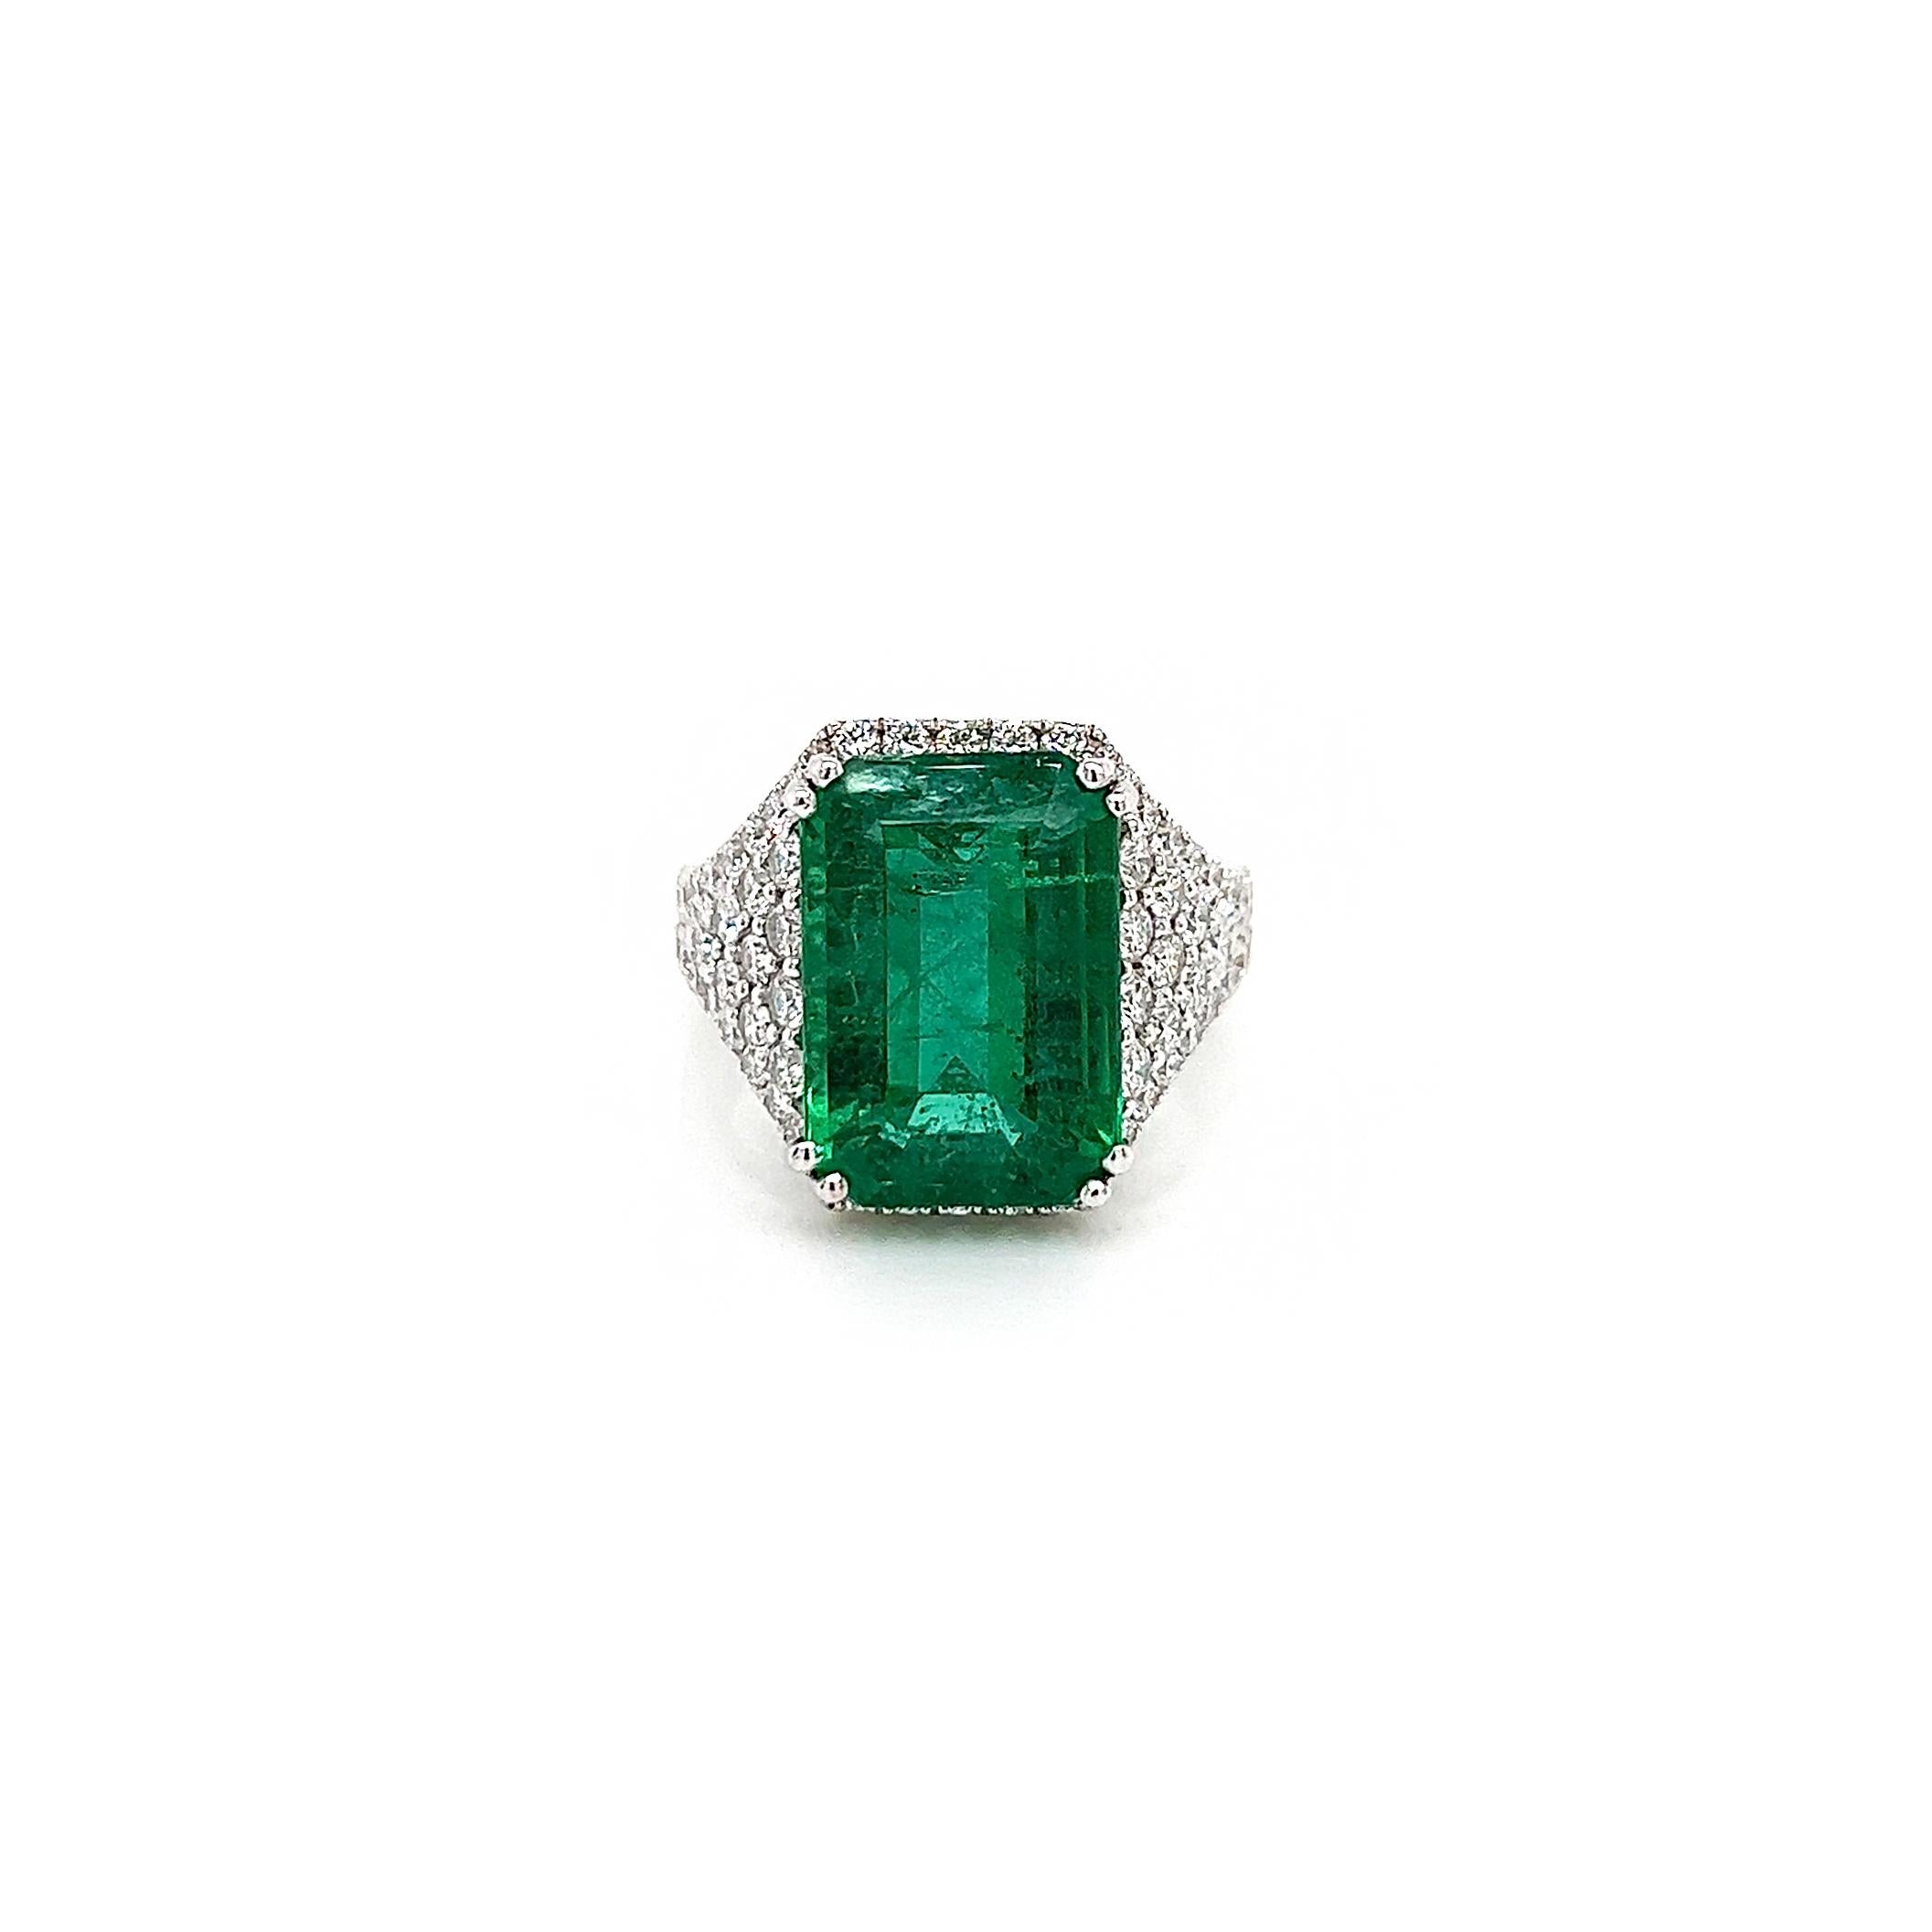 8.65 Total Carat Emerald and Diamond Pave-Set Ladies Ring. GIA Certified.

This unique Emerald Diamond Ring is made in 18K White Gold and has GIA certified 7.04ct Green Emerald in center and 19 Round Diamonds in total of 1.61cts. 

This amazing ring